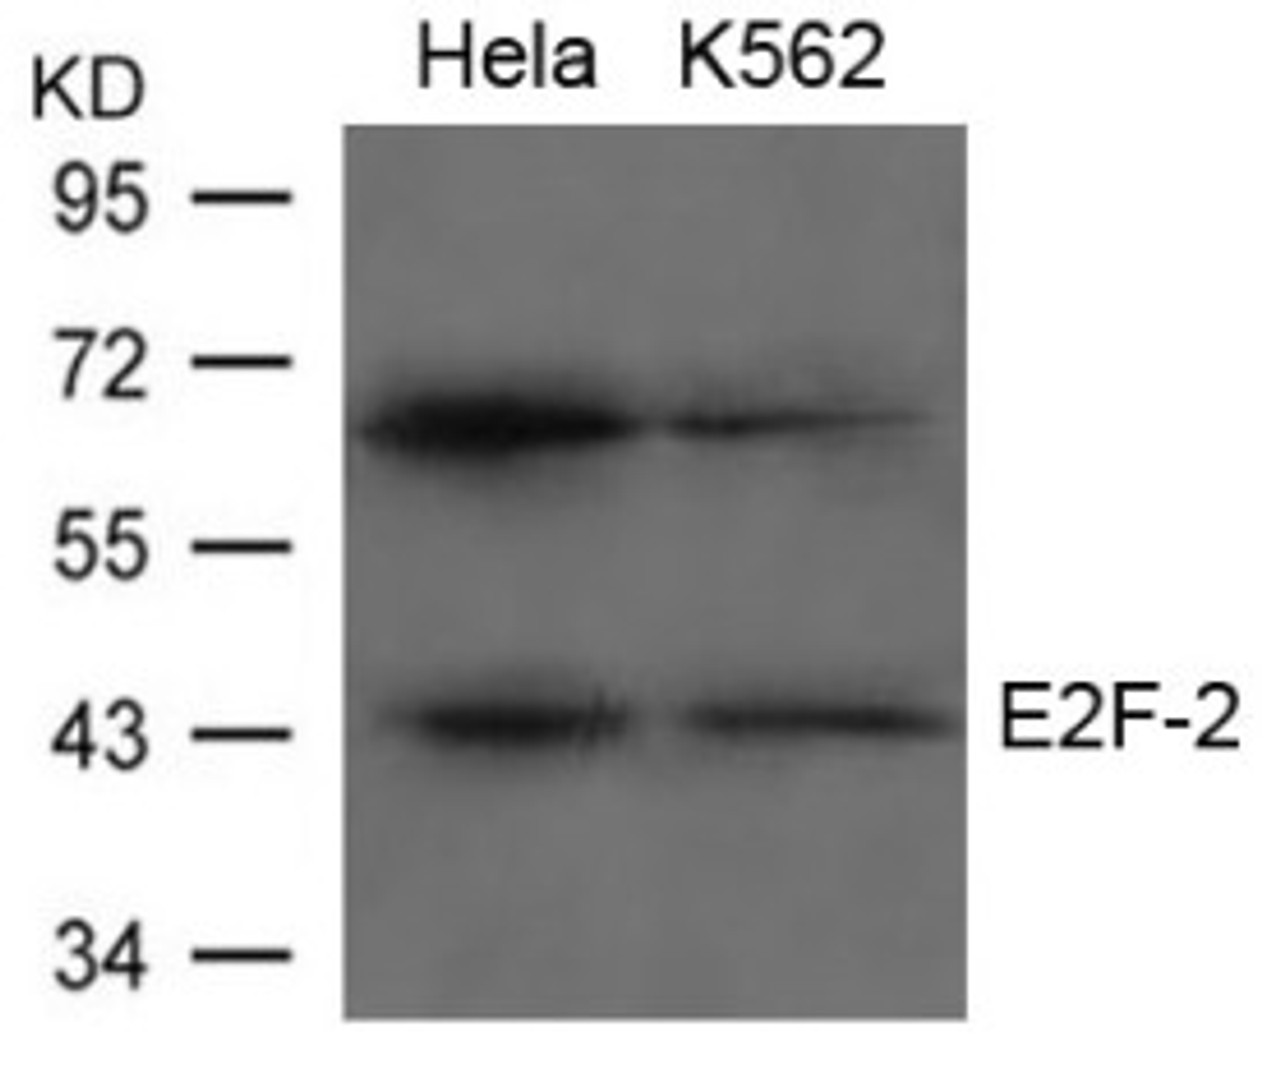 Western blot analysis of lysed extracts from HeLa and K562 cells using E2F-2 Antibody.